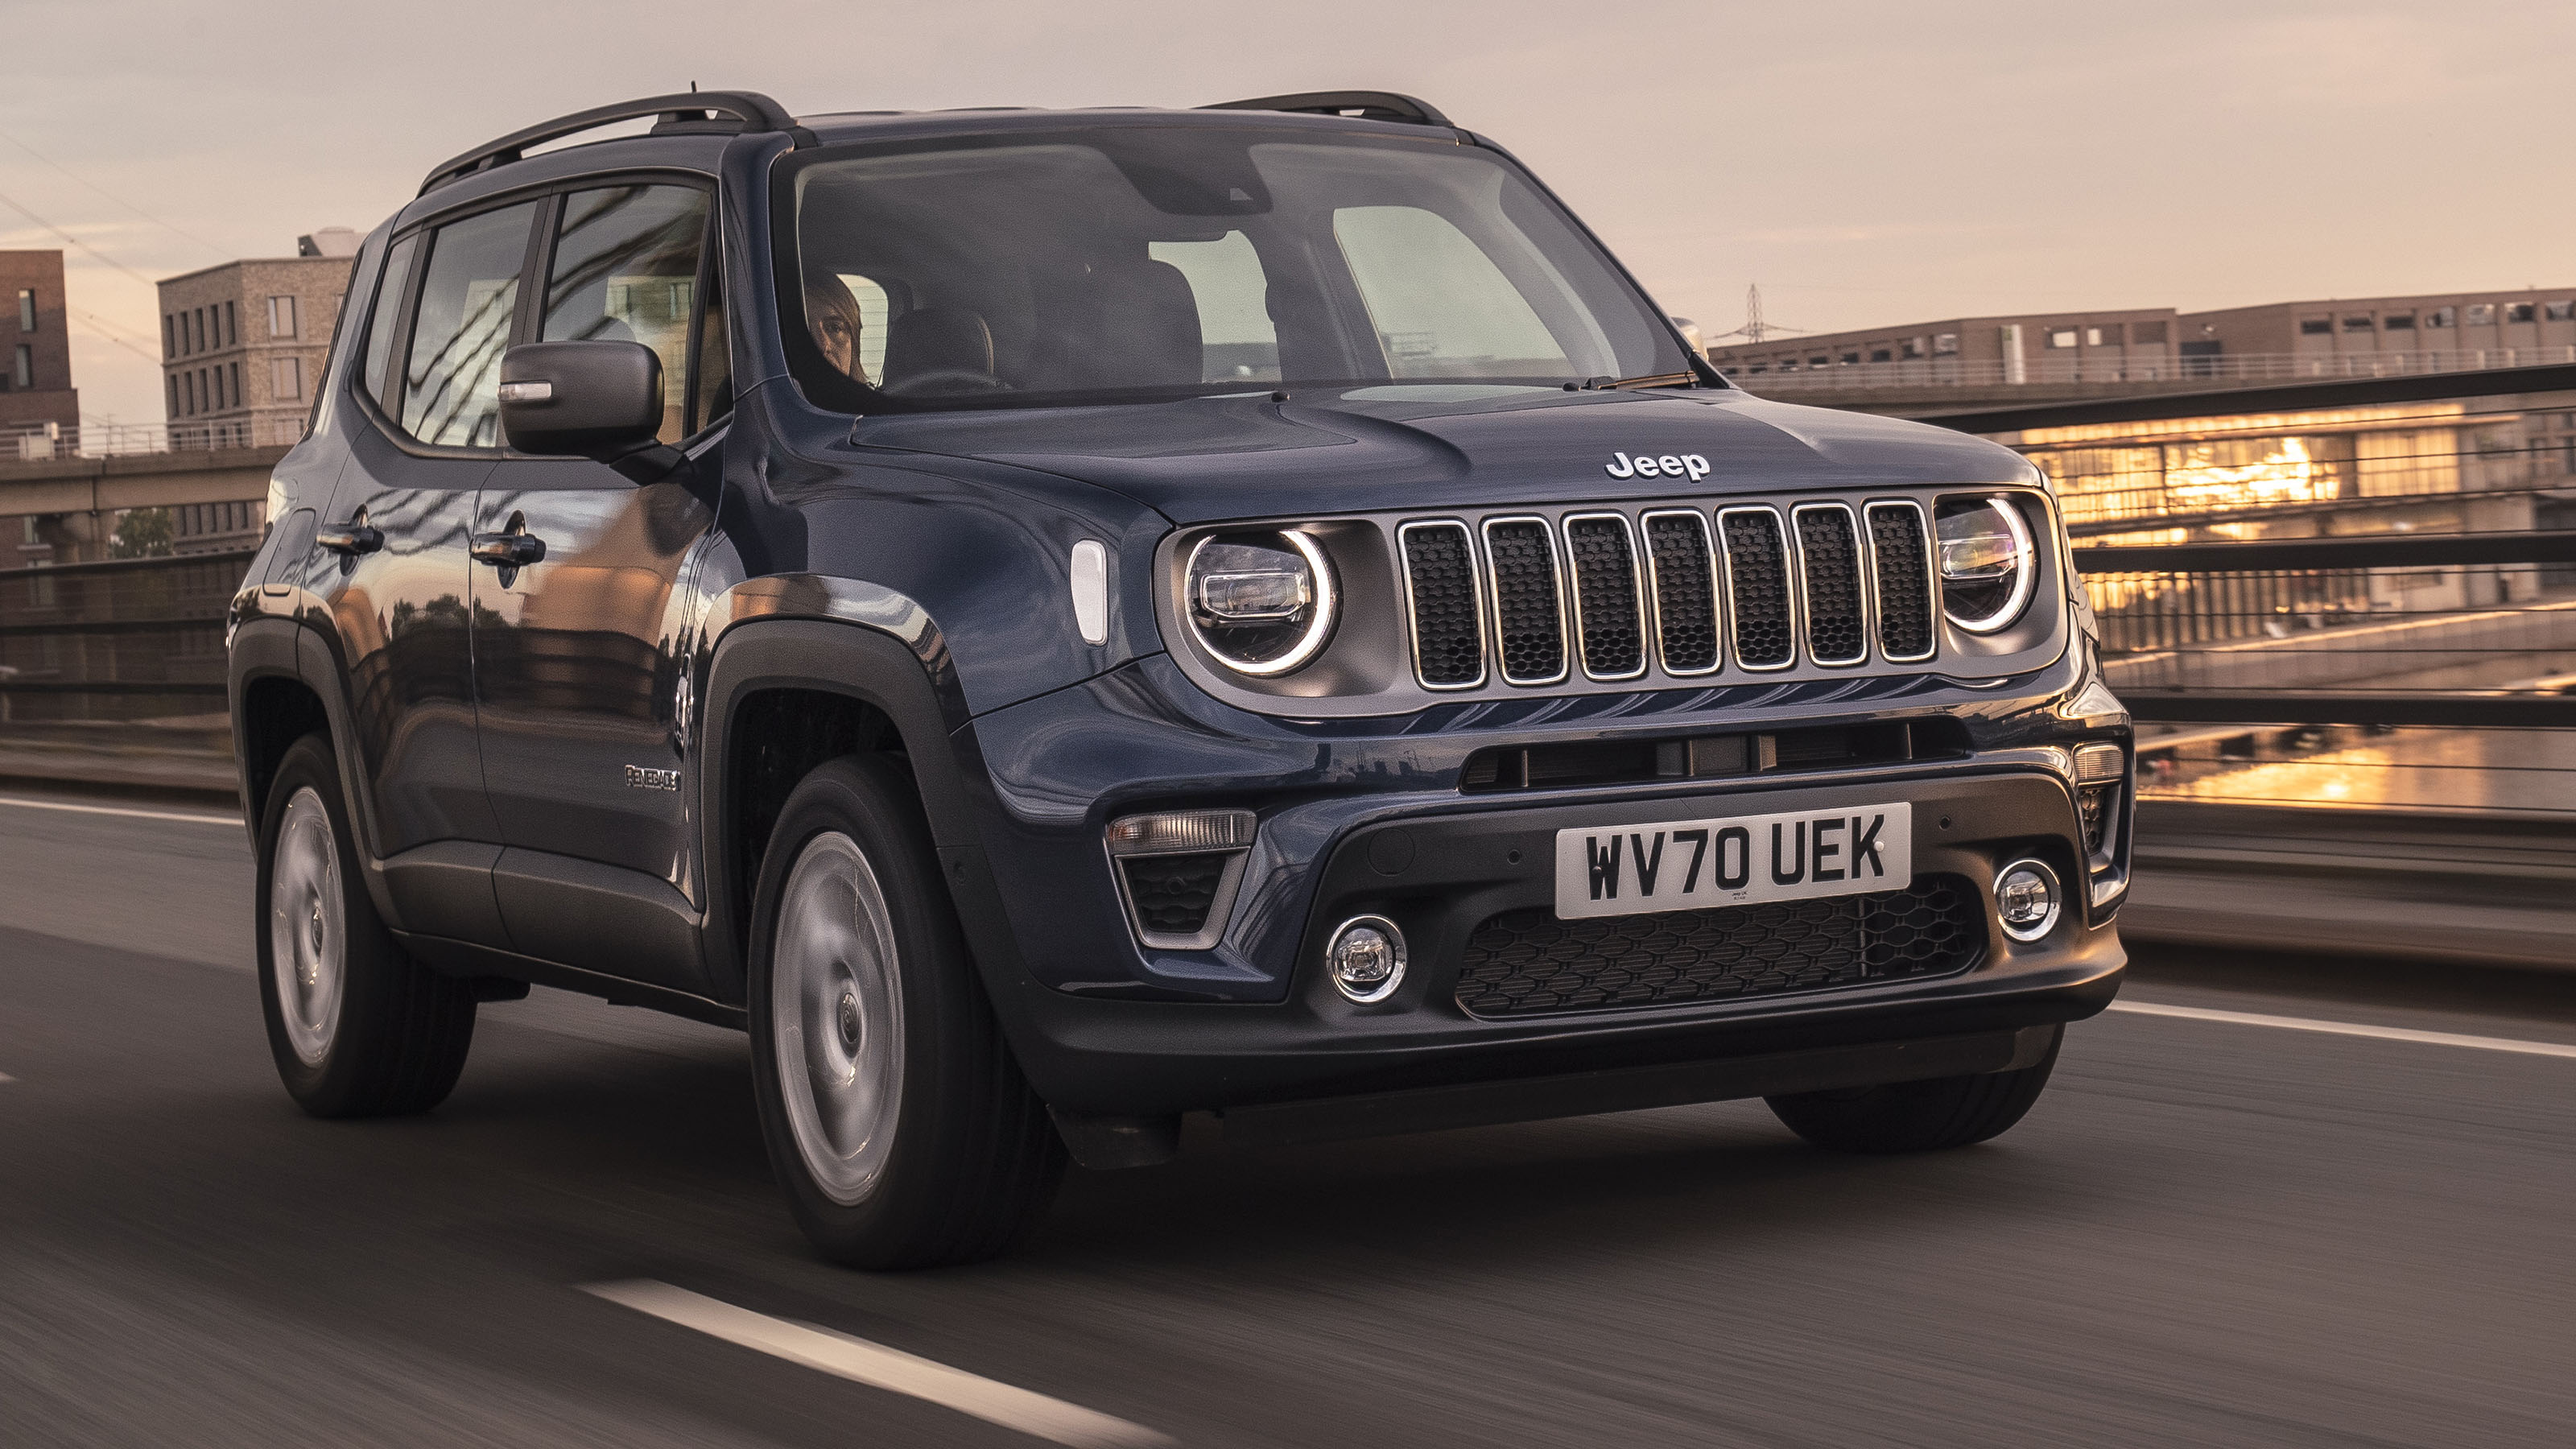 https://media.drivingelectric.com/image/private/s--507Pv72j--/v1654601959/drivingelectric/2022-06/Jeep-Renegade-4xe-4_fa4tyk.jpg